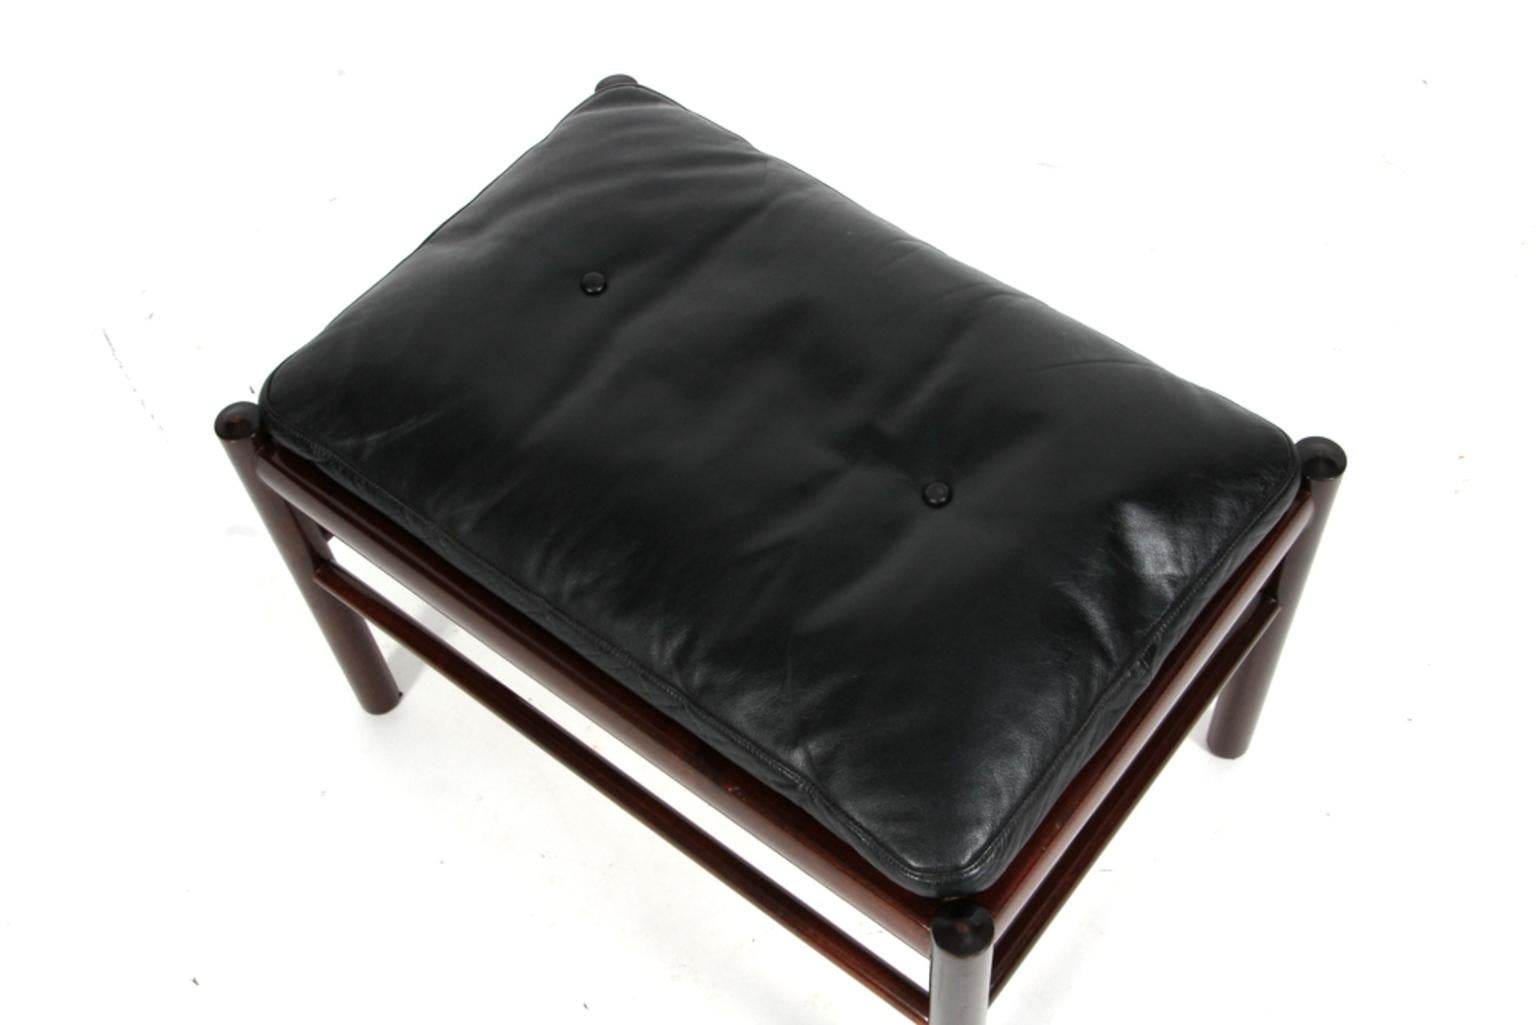 Ole Wanscher ottoman for Colonial chair original upholstered with black leather.

Made in mahogany. 

Model PJ 149 colonial chair, made by Poul Jeppesen.